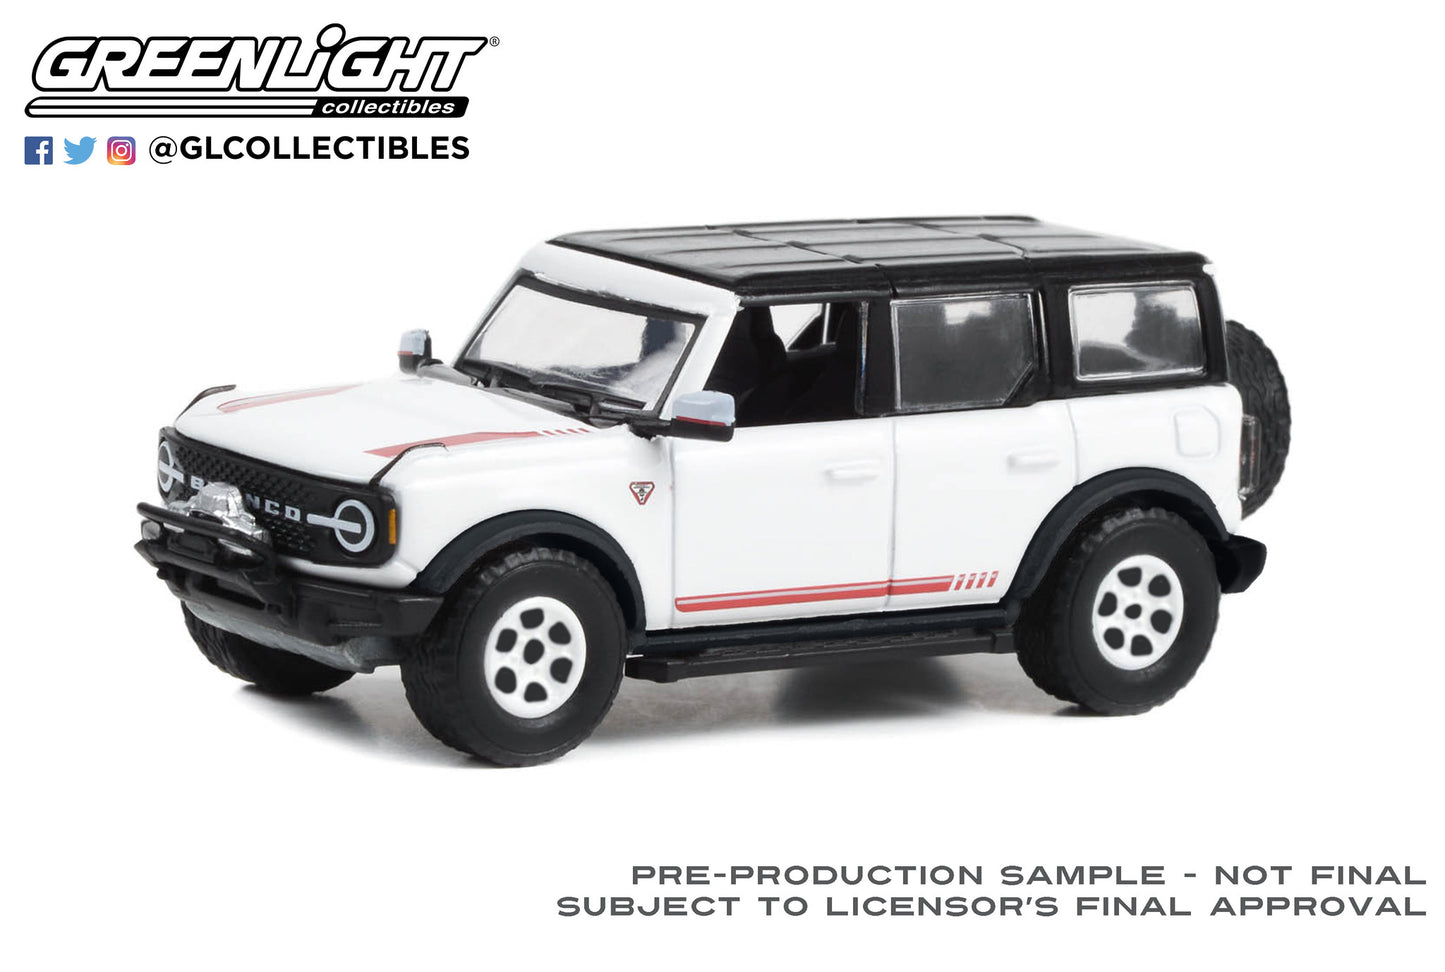 GreenLight 1:64 Barrett-Jackson Scottsdale Edition Series 11 - 2021 Ford Bronco “Bronco 66” First Edition (Lot #3001) - Oxford White with Black Roof 37270-F